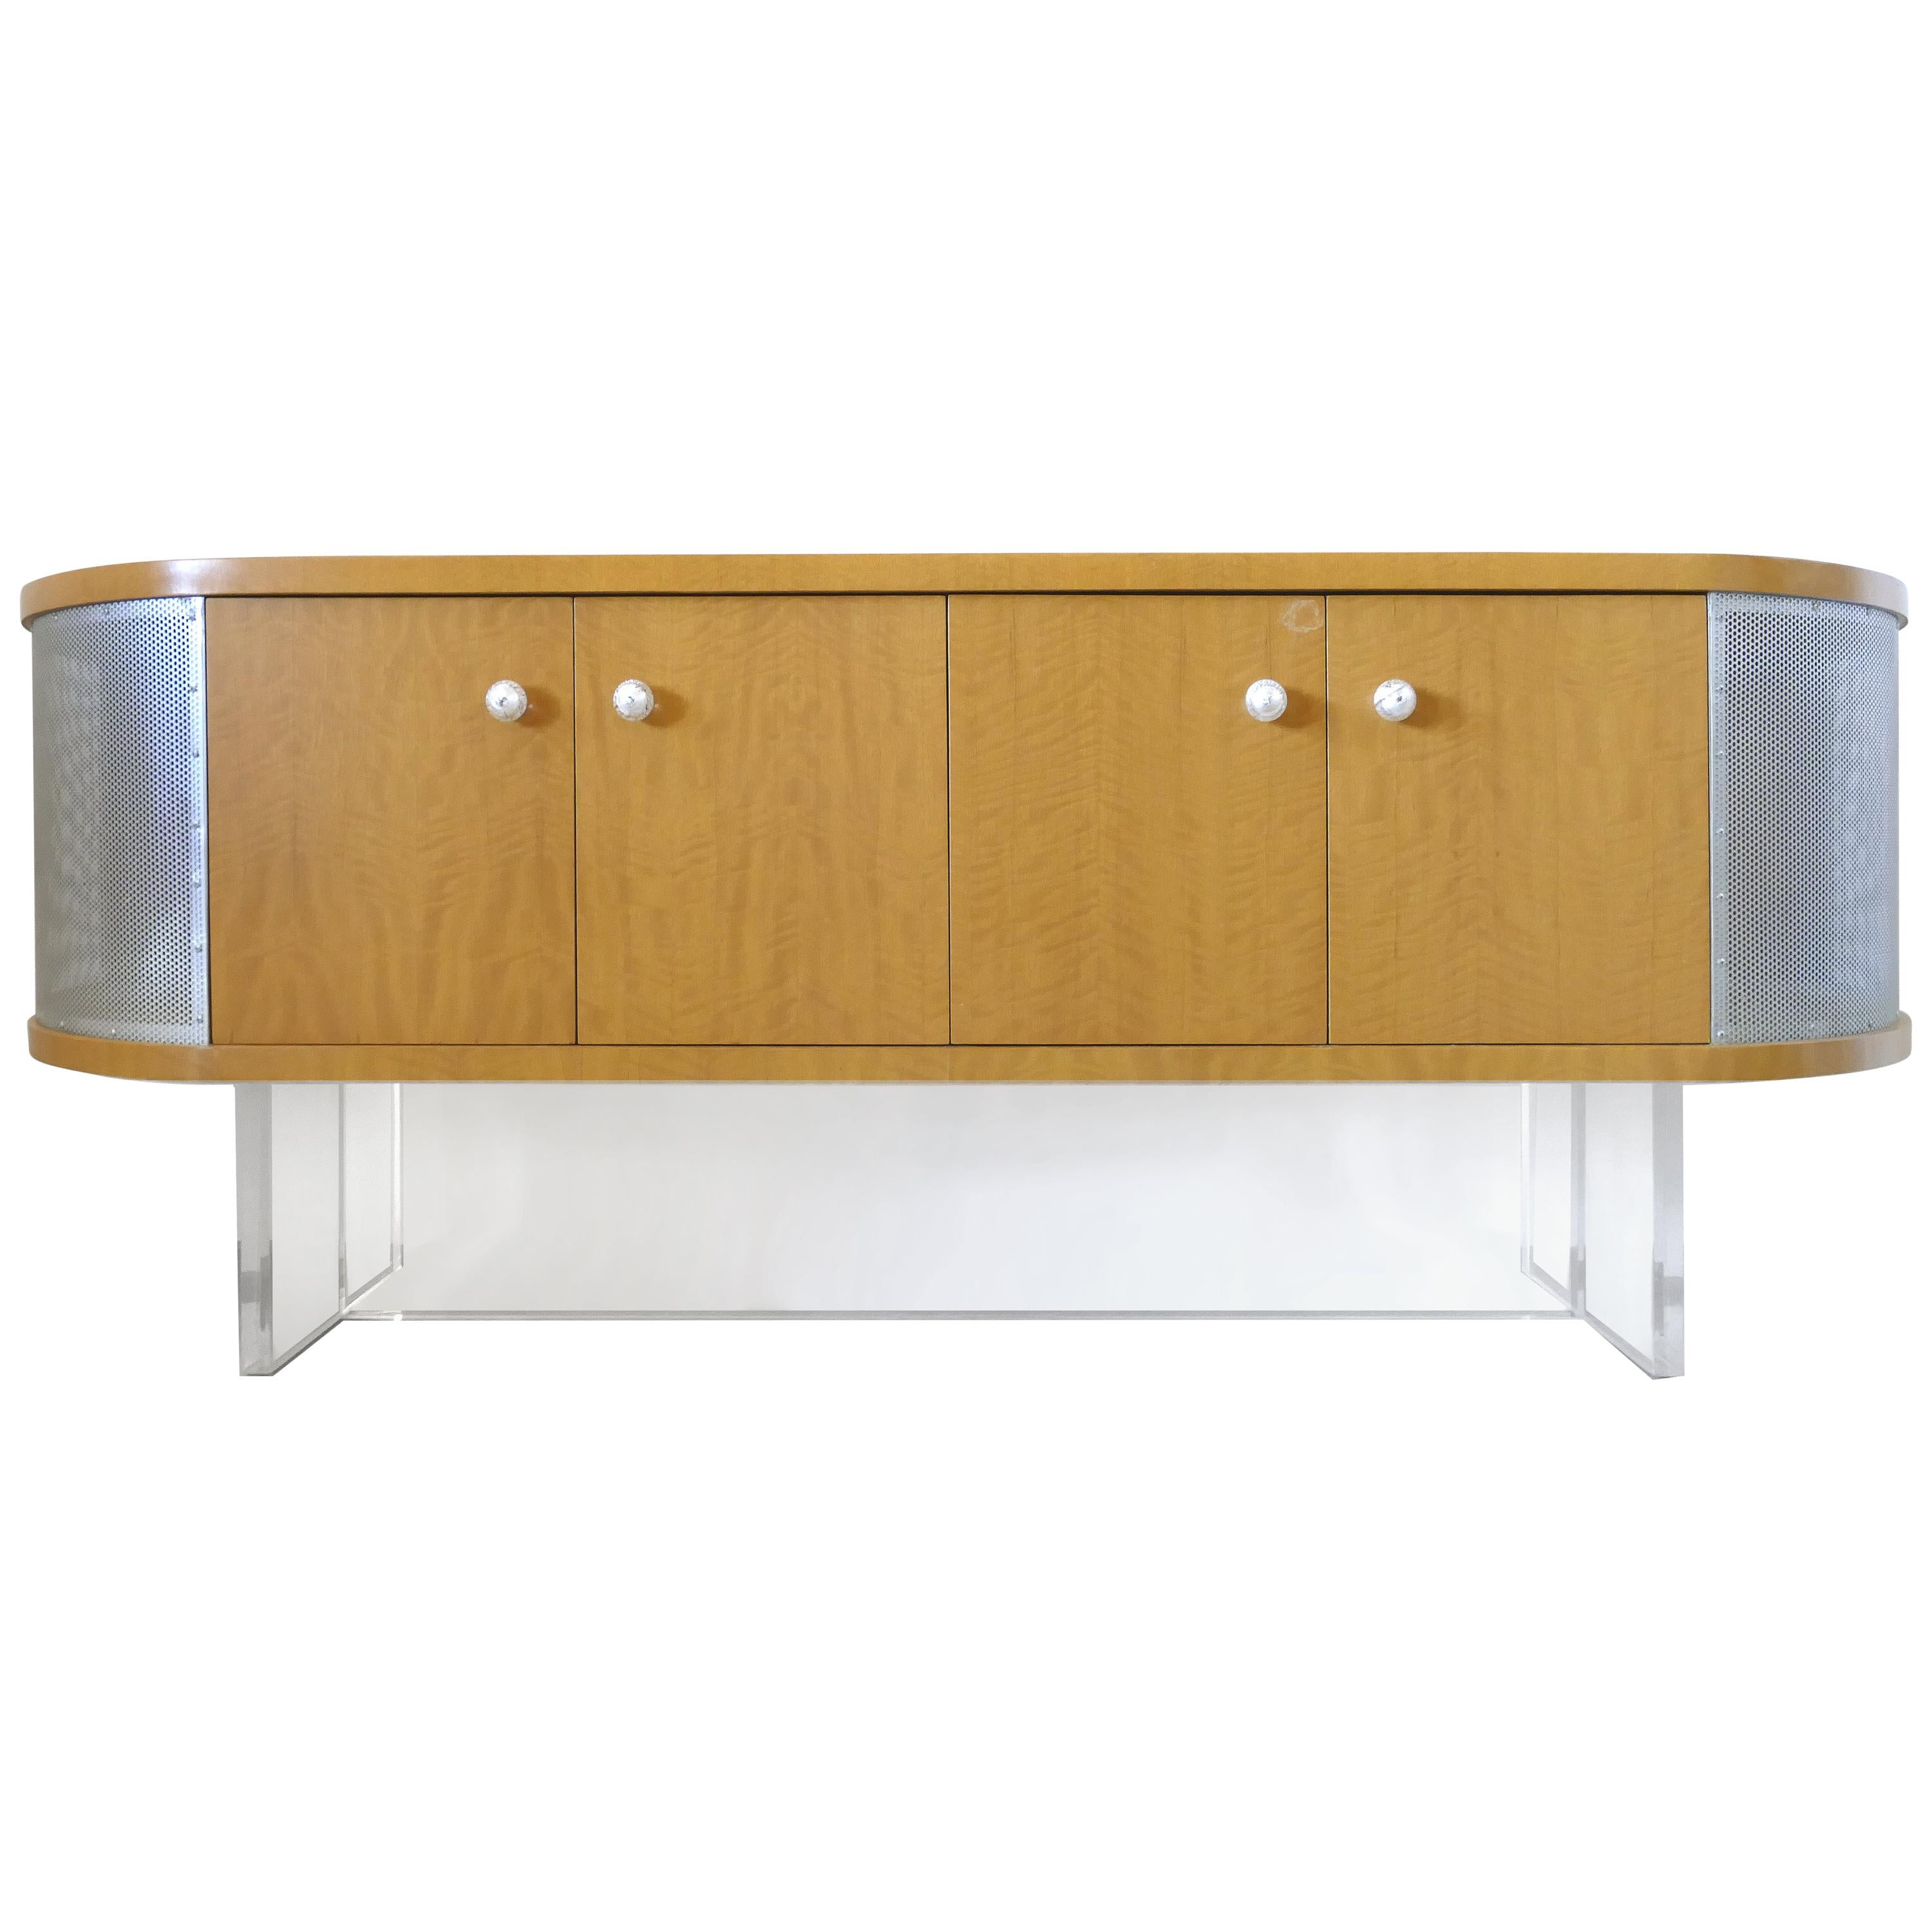 Maple Media Cabinet/Credenza with Lucite Base and Glass Handles, Custom Made